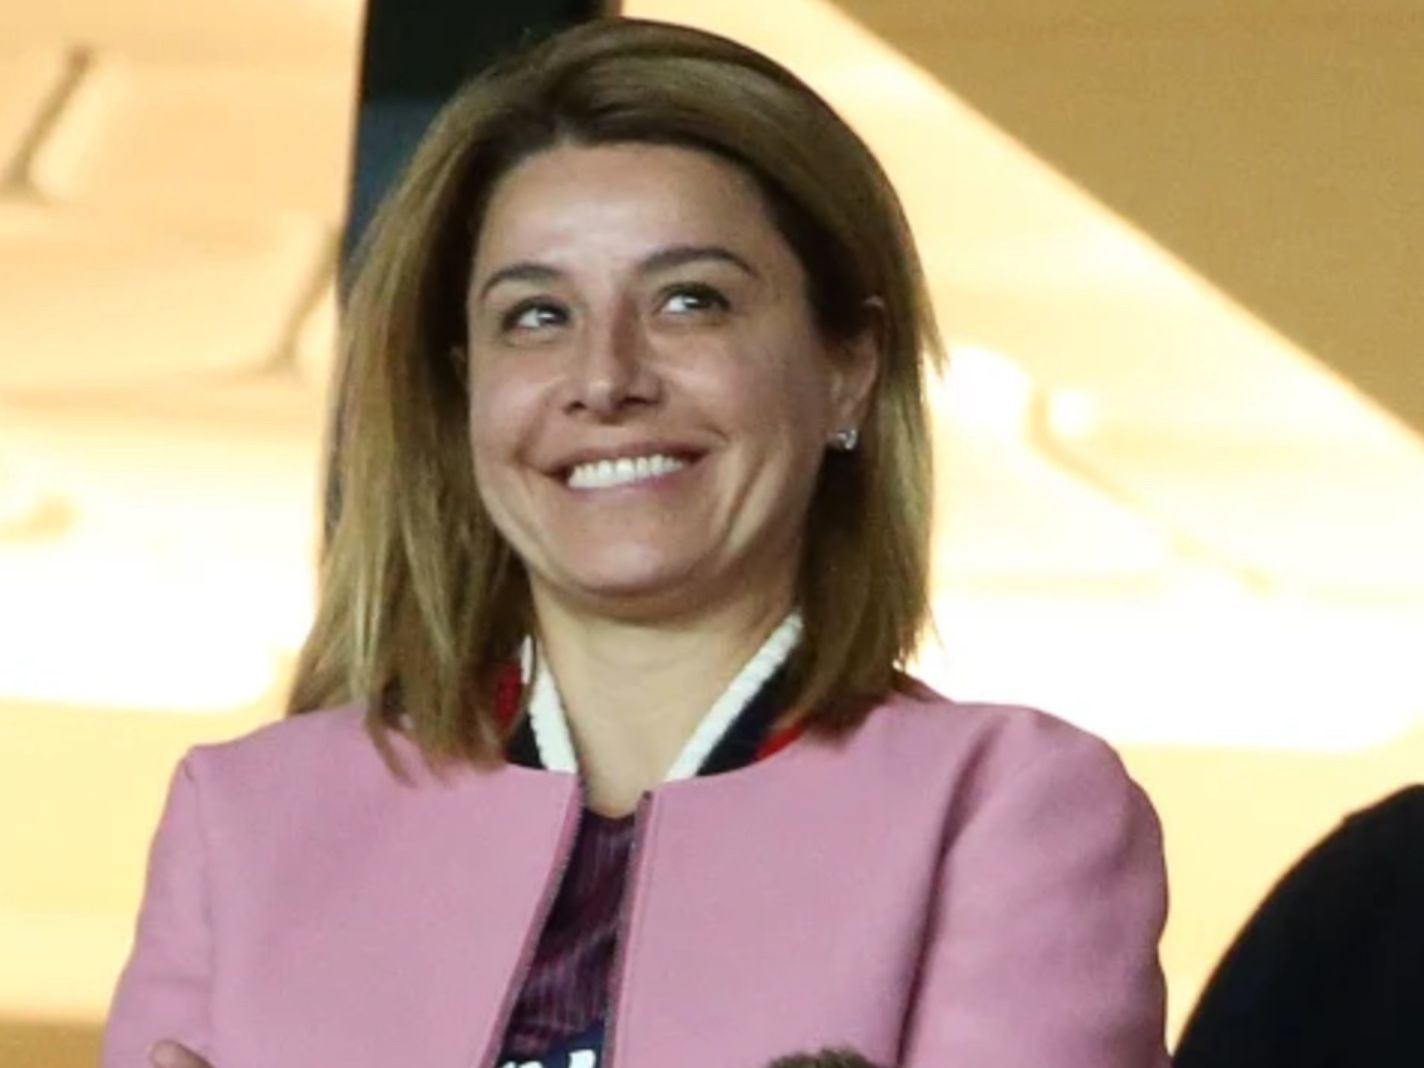 Who Is Rafaela Pimenta And Why Was She At Anfield?